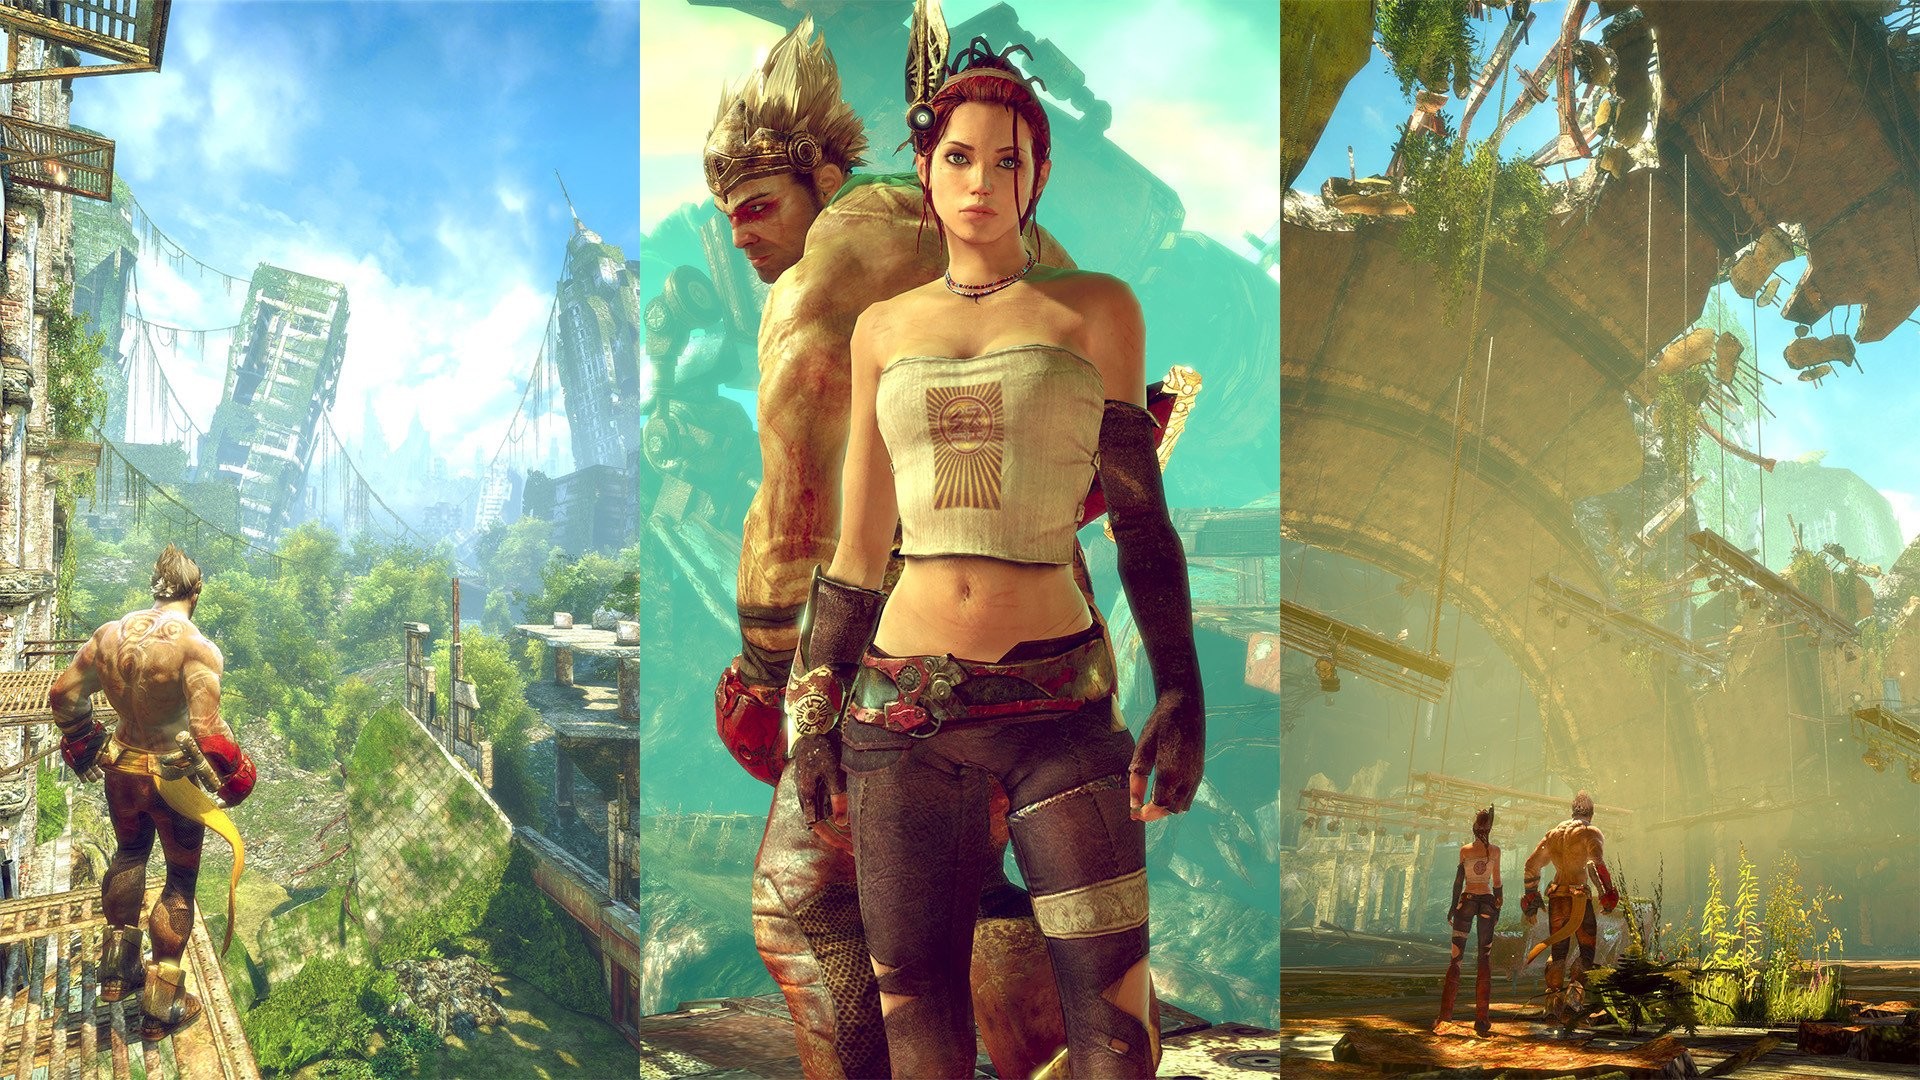 1920x1080 Computerspiele - Enslaved: Odyssey To The West Wallpaper